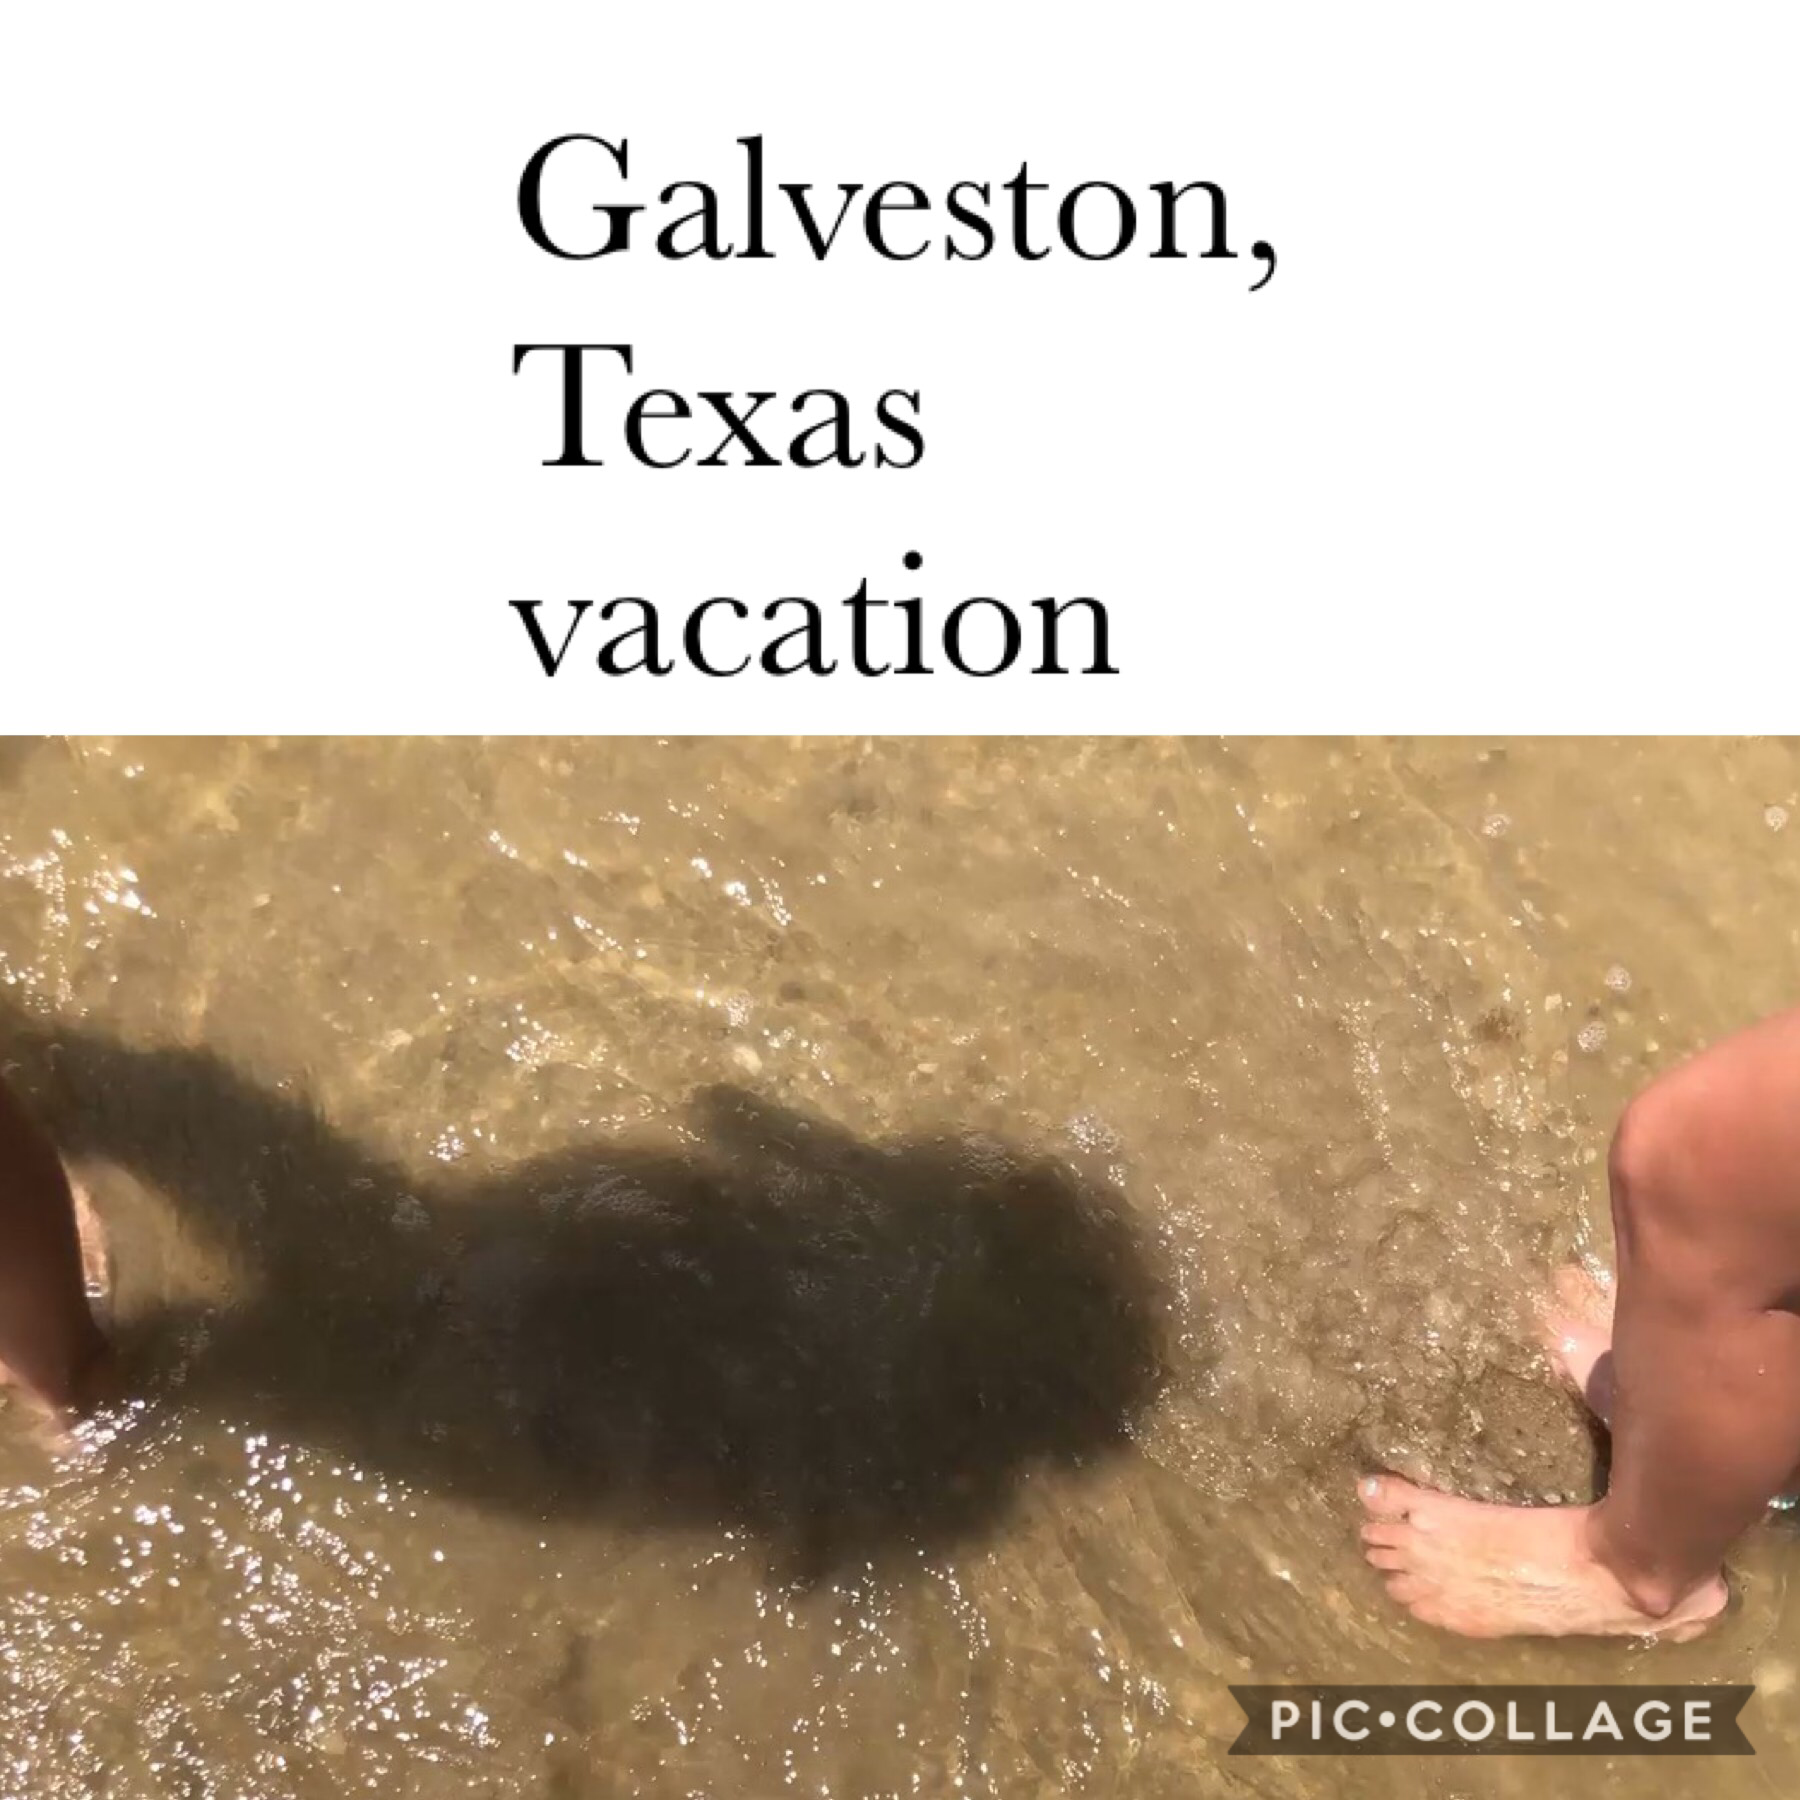 We went to Galveston, Texas! It was me and my sisters first time seeing the ocean. It was so much fun! If you would like to see more fun pics of the vacation make sure to leave them in the comments down bellow! Also make sure to follow me and like my pics